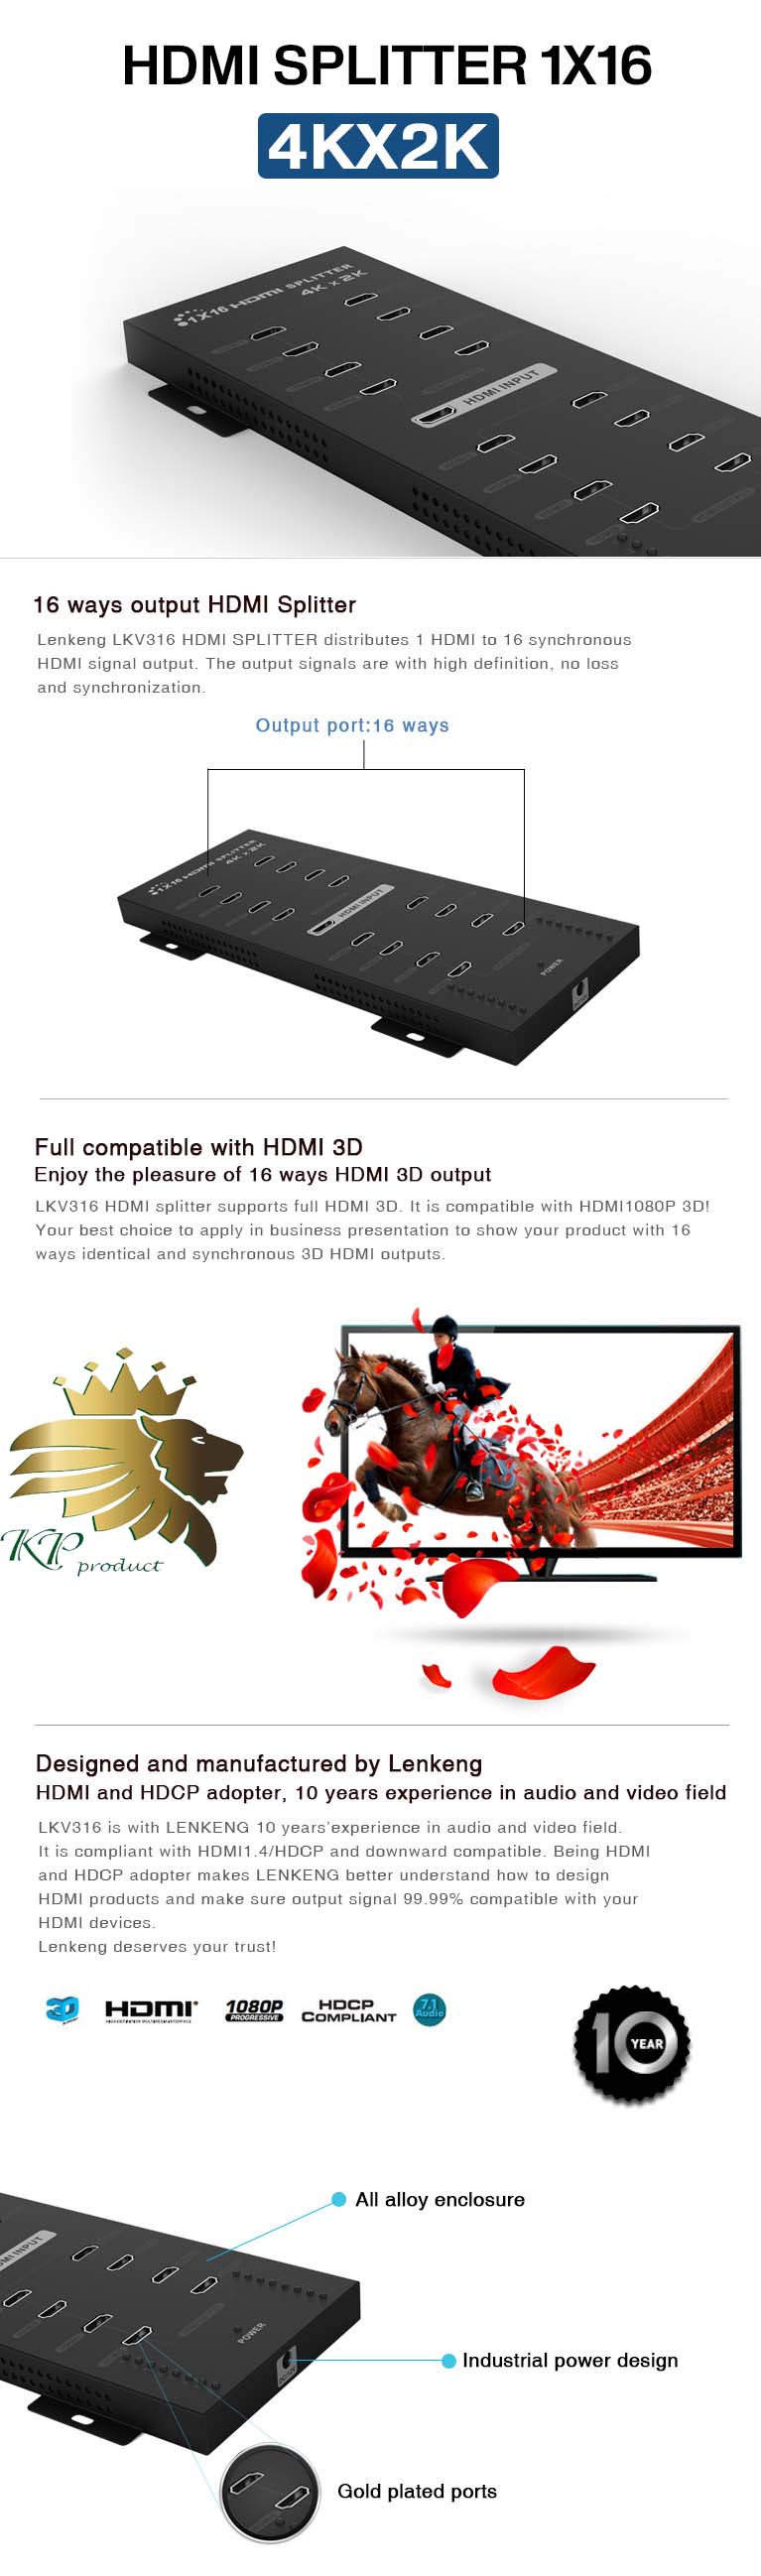 HDMI LKV316A 4K x 2K wall-mountable HDMI splitter 1x16 with full 3D and real 4Kx2K